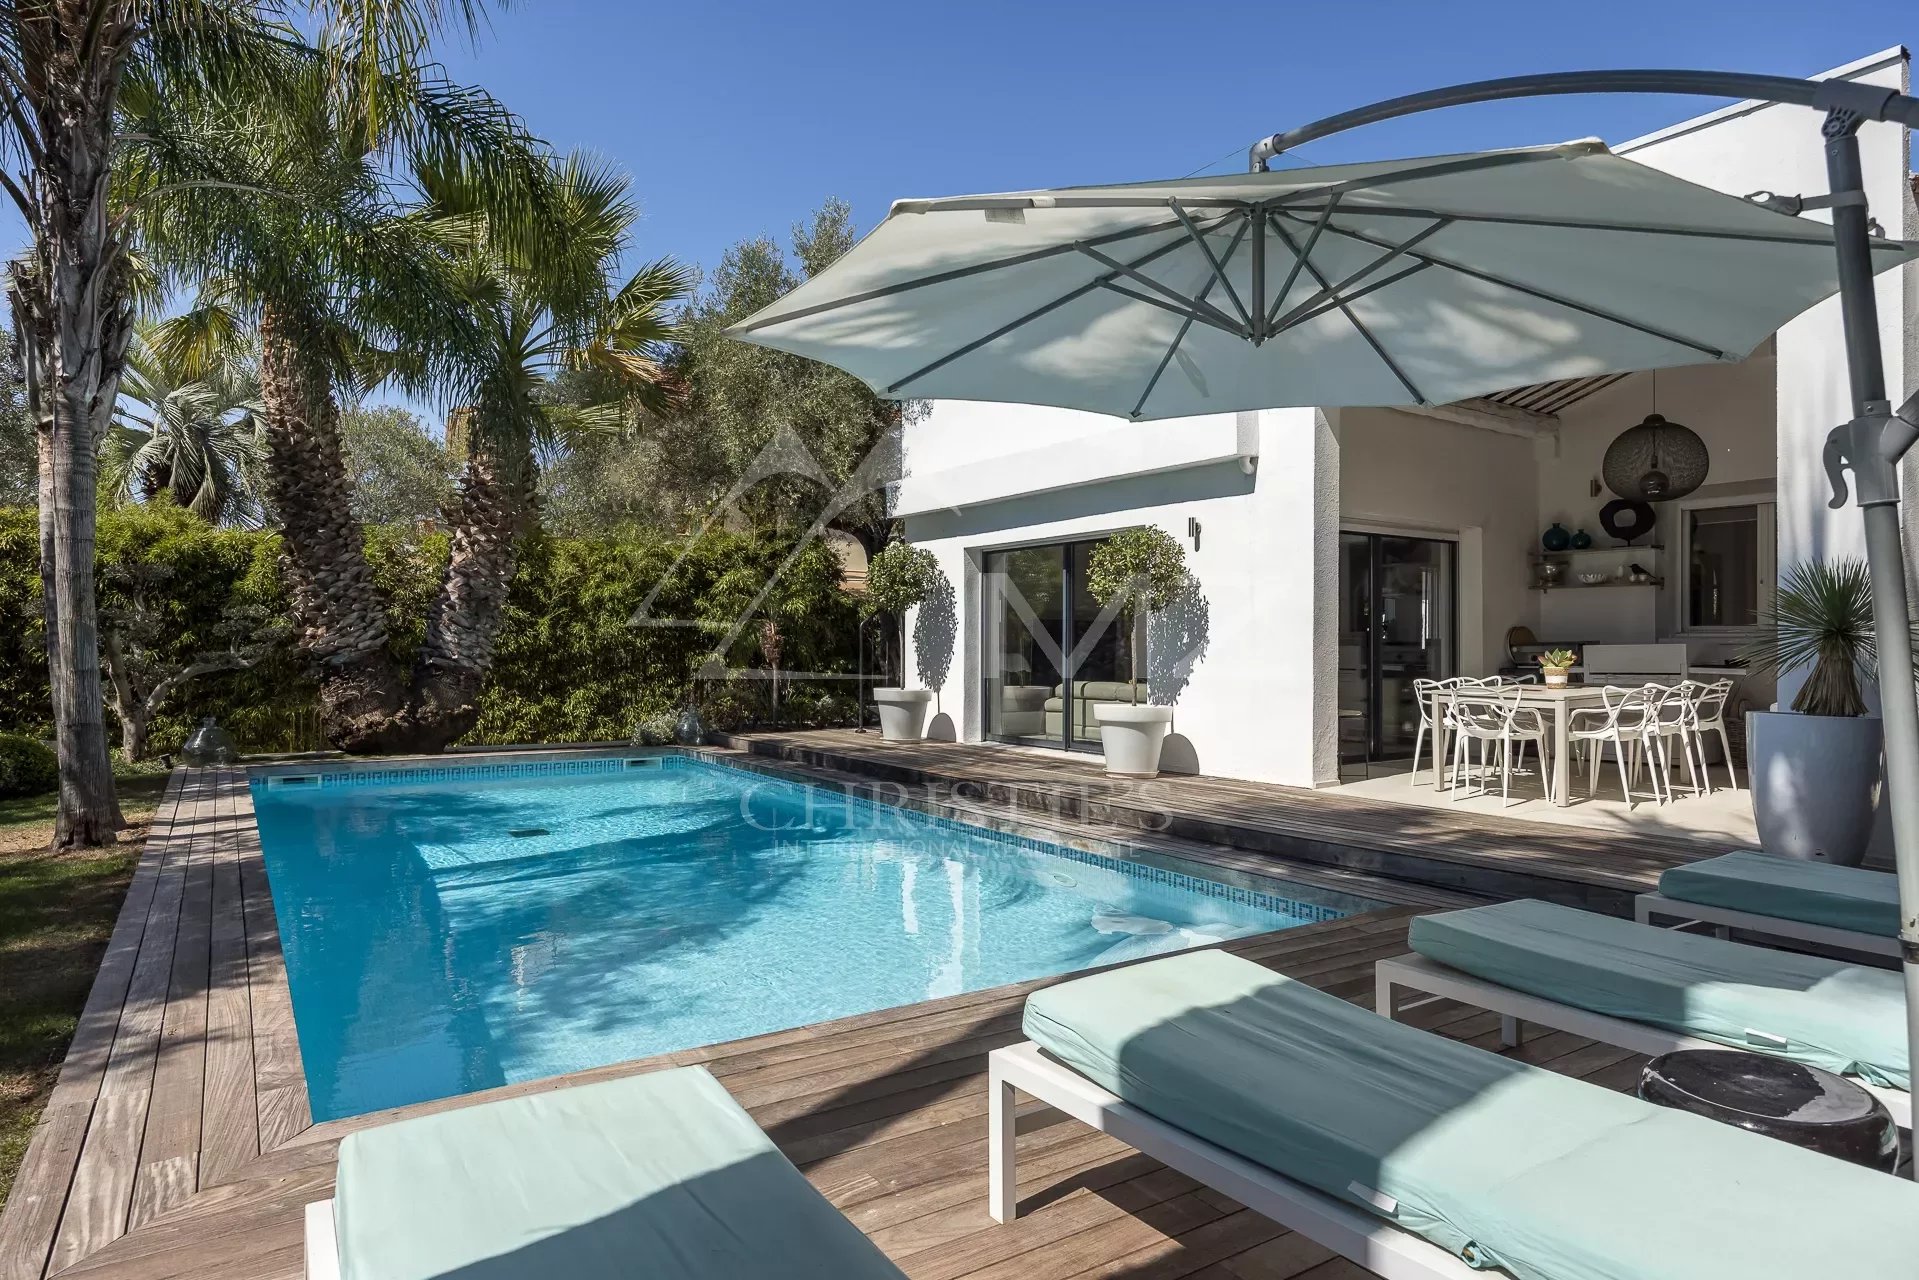 Juan-les-Pins - Villa in a peaceful location, close to the beaches